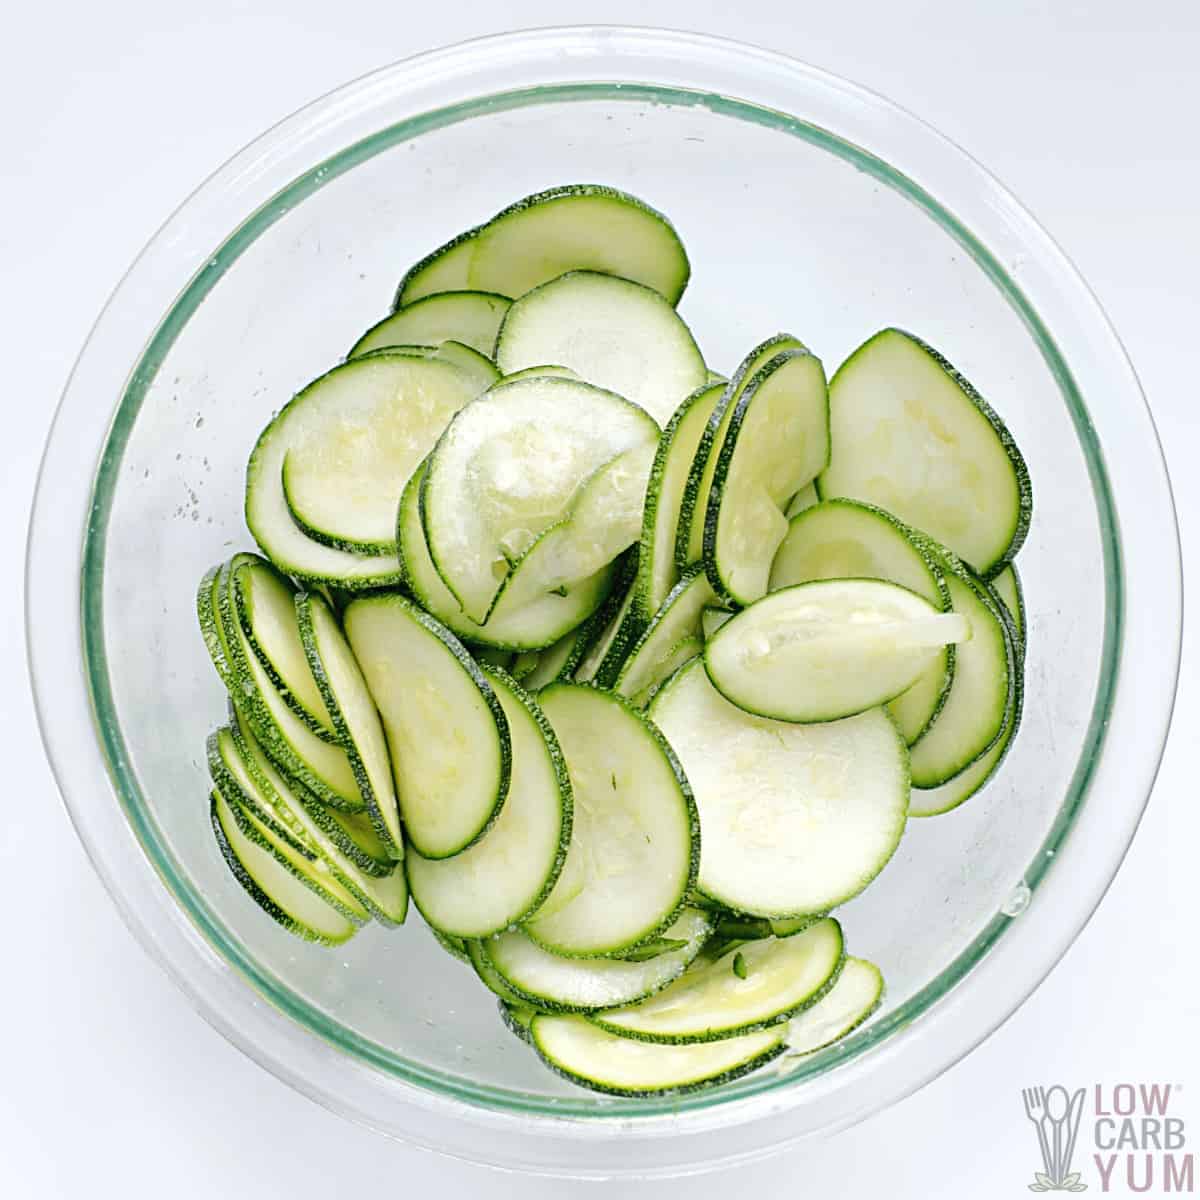 salted and oiled zucchini slices in glass mixing bowl.